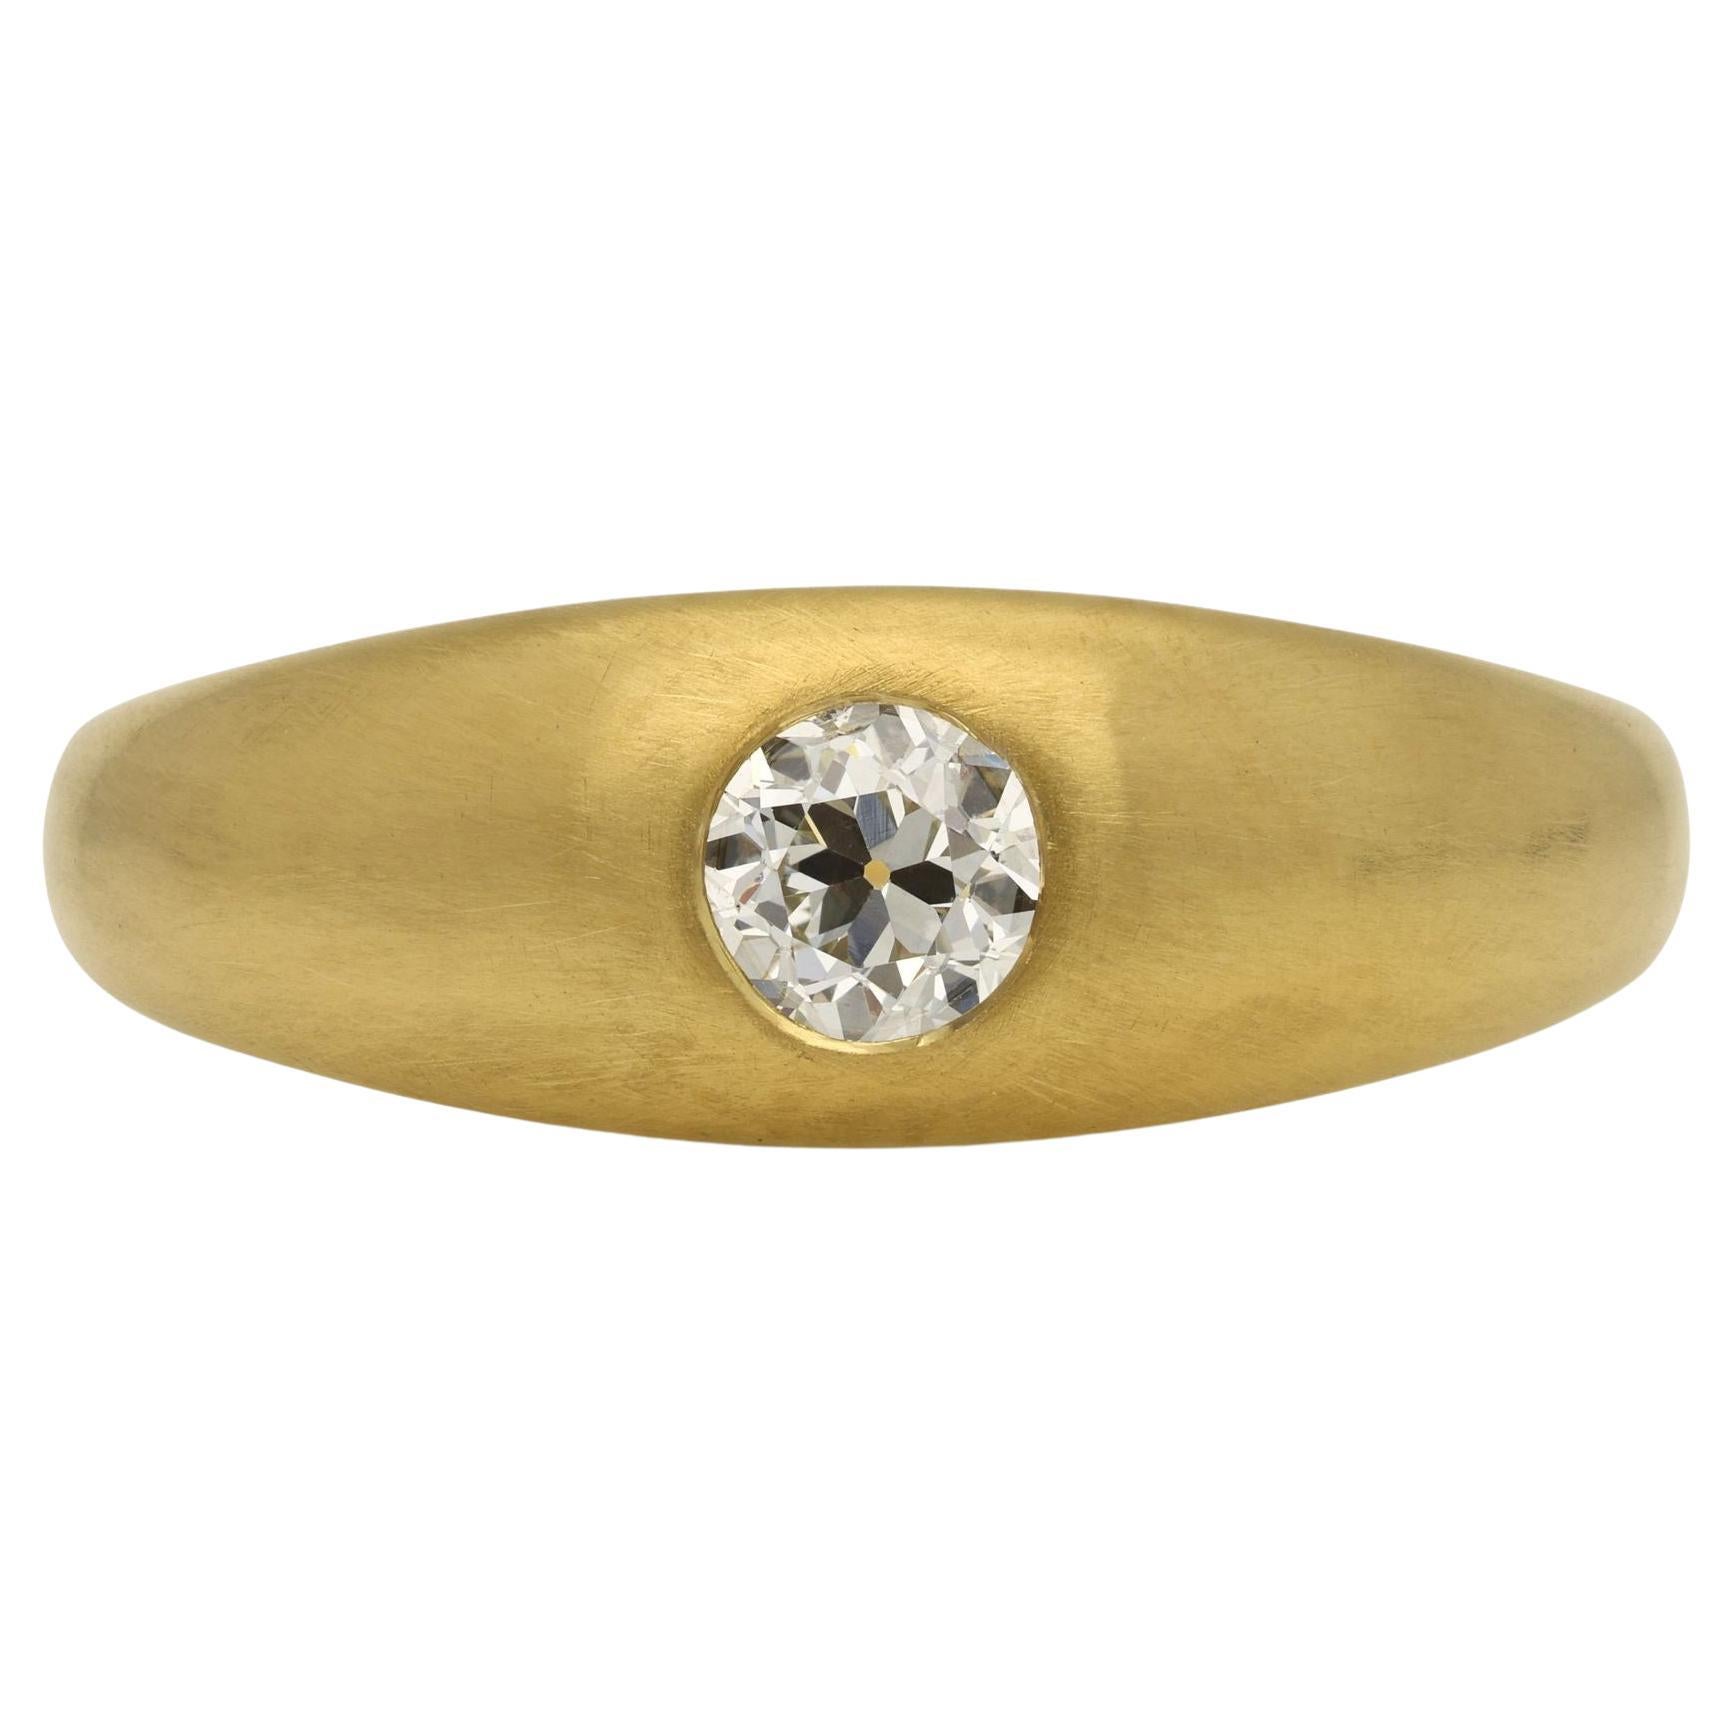 Hancocks Contemporary 0.54ct Old European Cut Diamond and 22ct Gold Band Ring (bague en or 22ct)